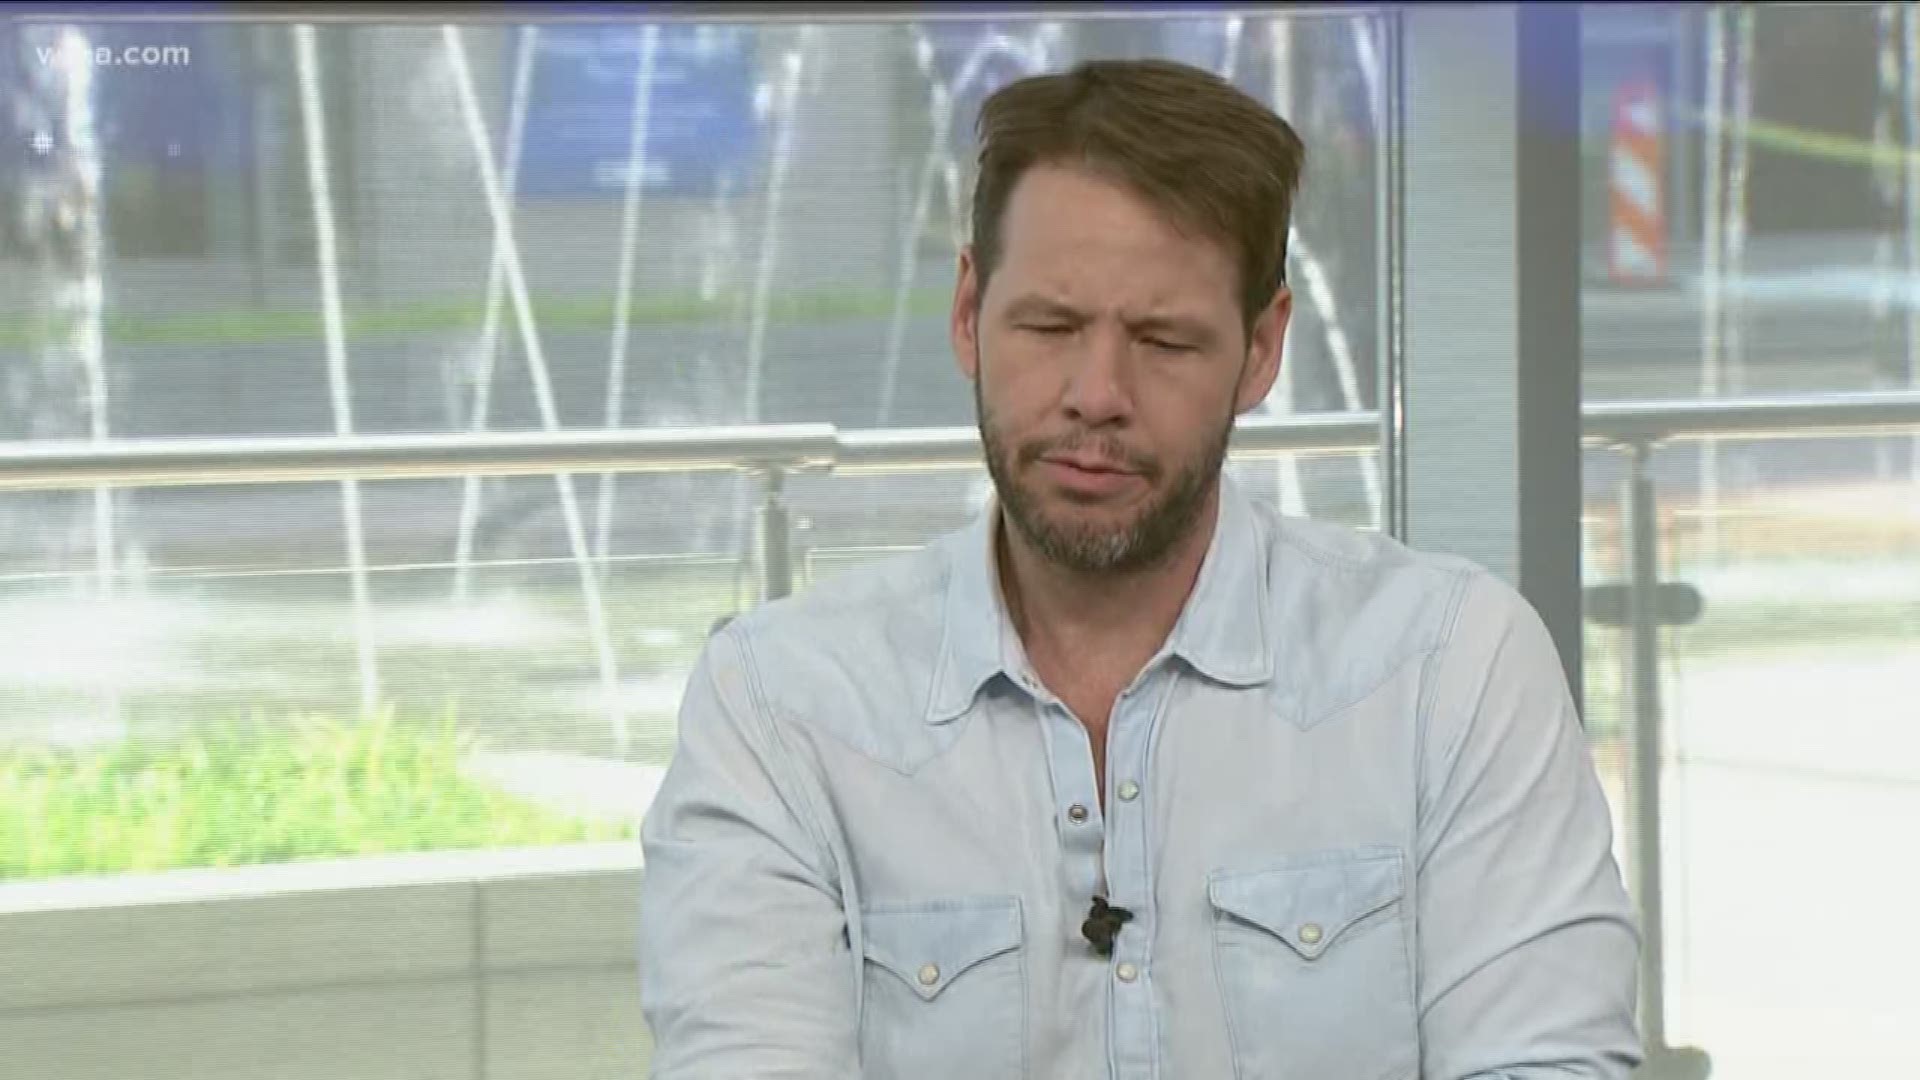 You know him from TV's "The Mindy Project" and movies like "Sisters" and "Blockers." Now Ike Barinholtz has a new movie, a political satire called "The Oath." In theaters Oct. 19.